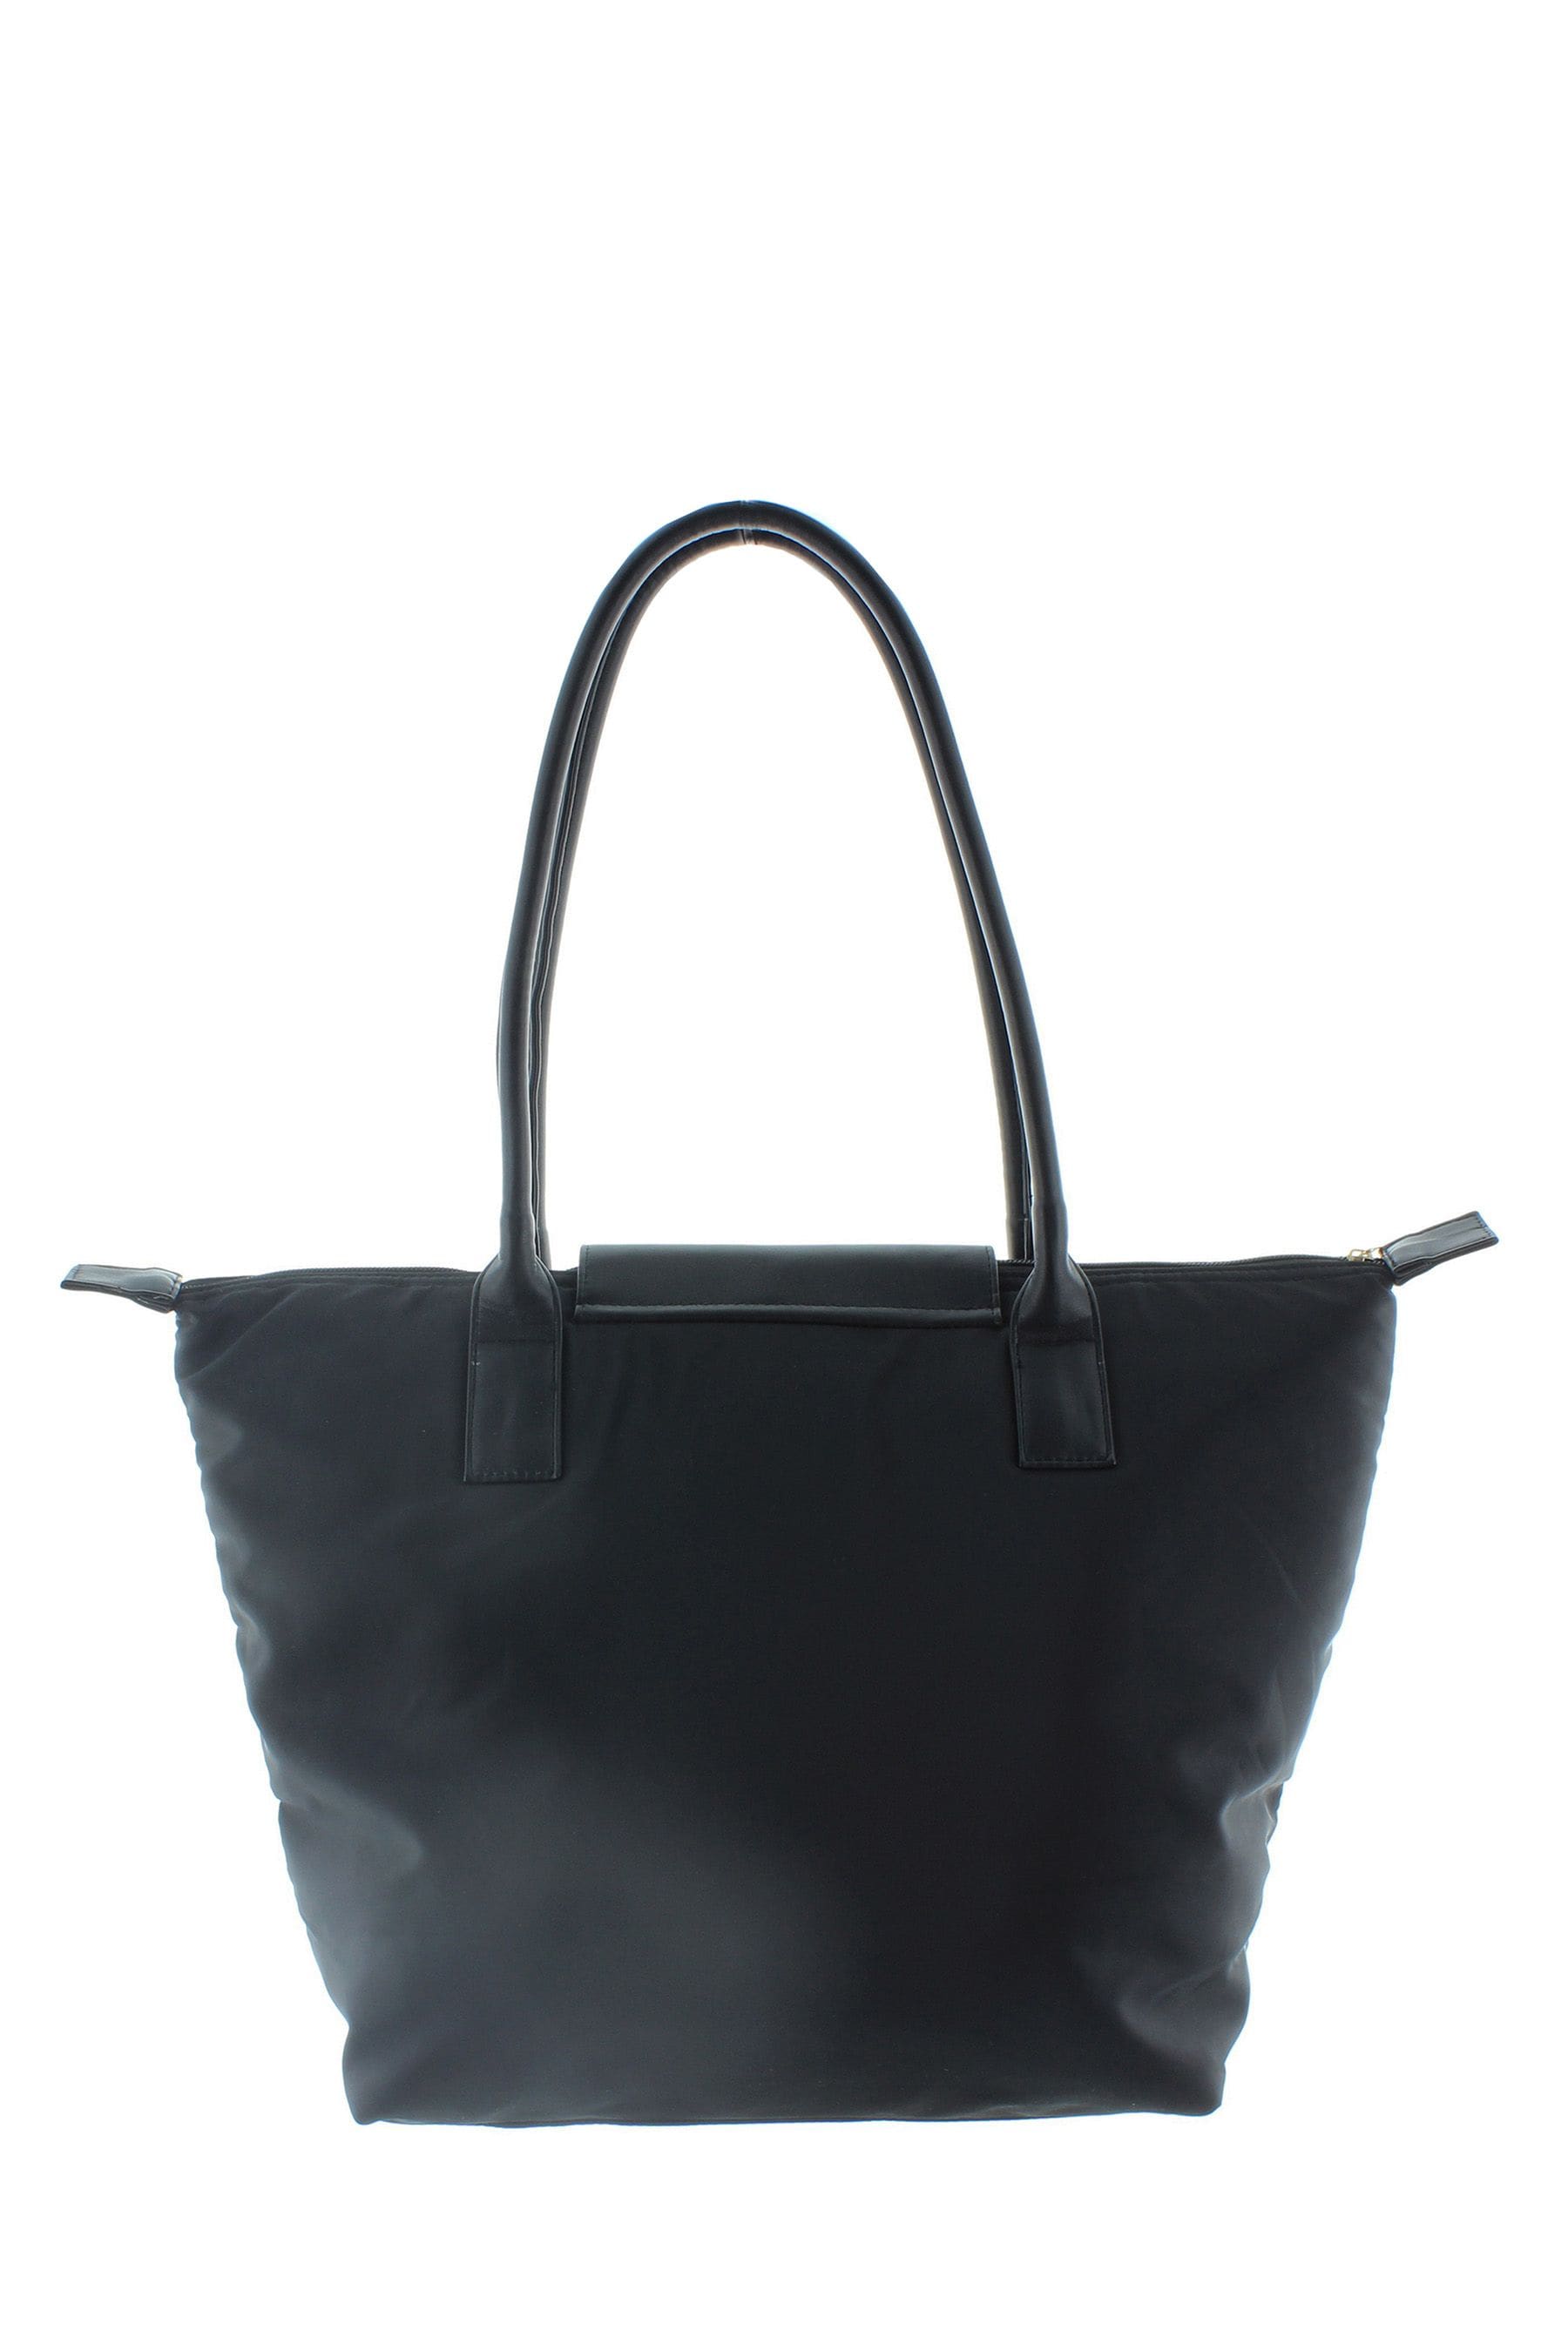 Buy Storm Tulia Large Black Tote Bag from the Next UK online shop